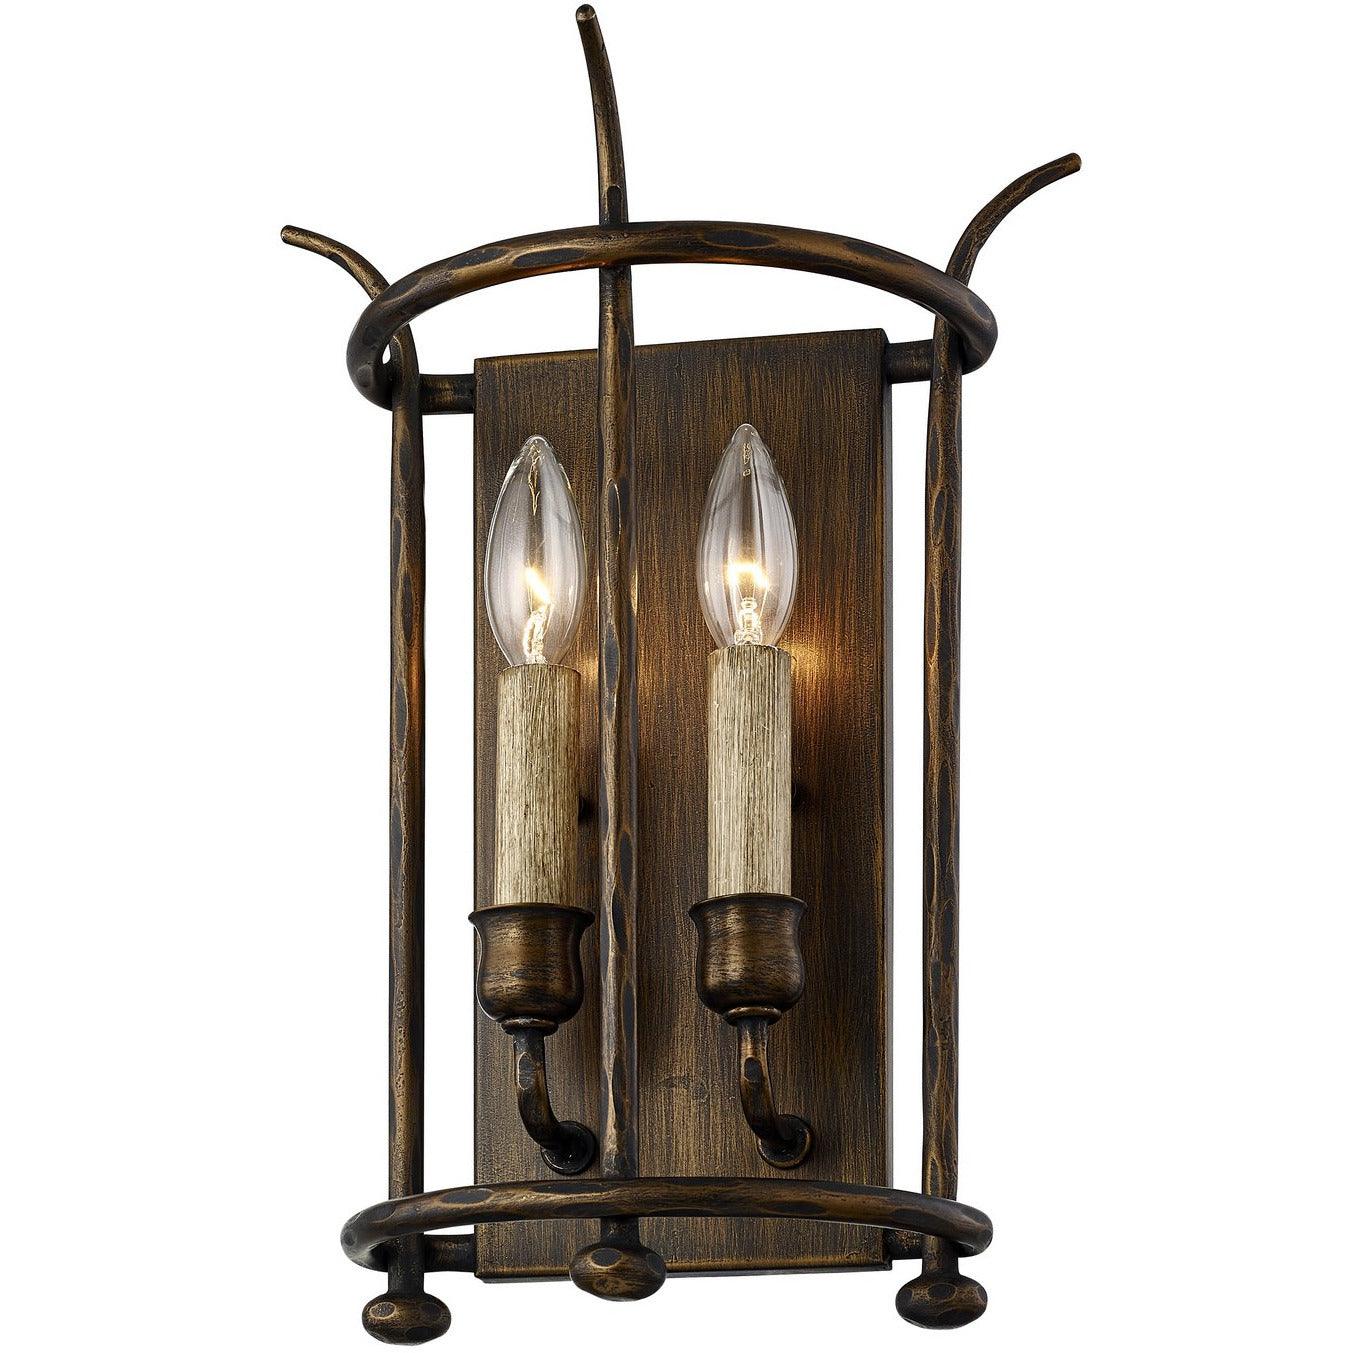 Troy Lighting - Paso Robles Wall Sconce - B6641 | Montreal Lighting & Hardware